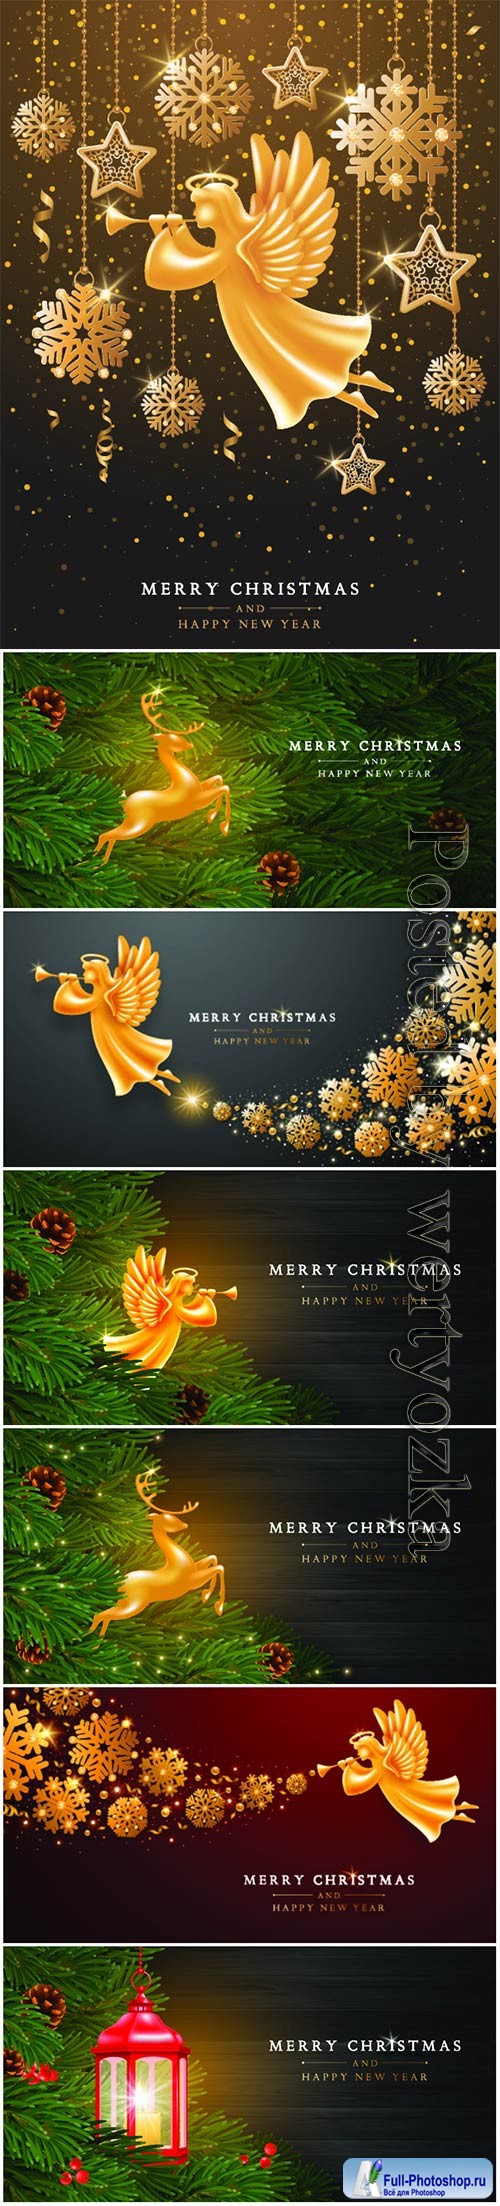 Christmas background with angels and deers in vector